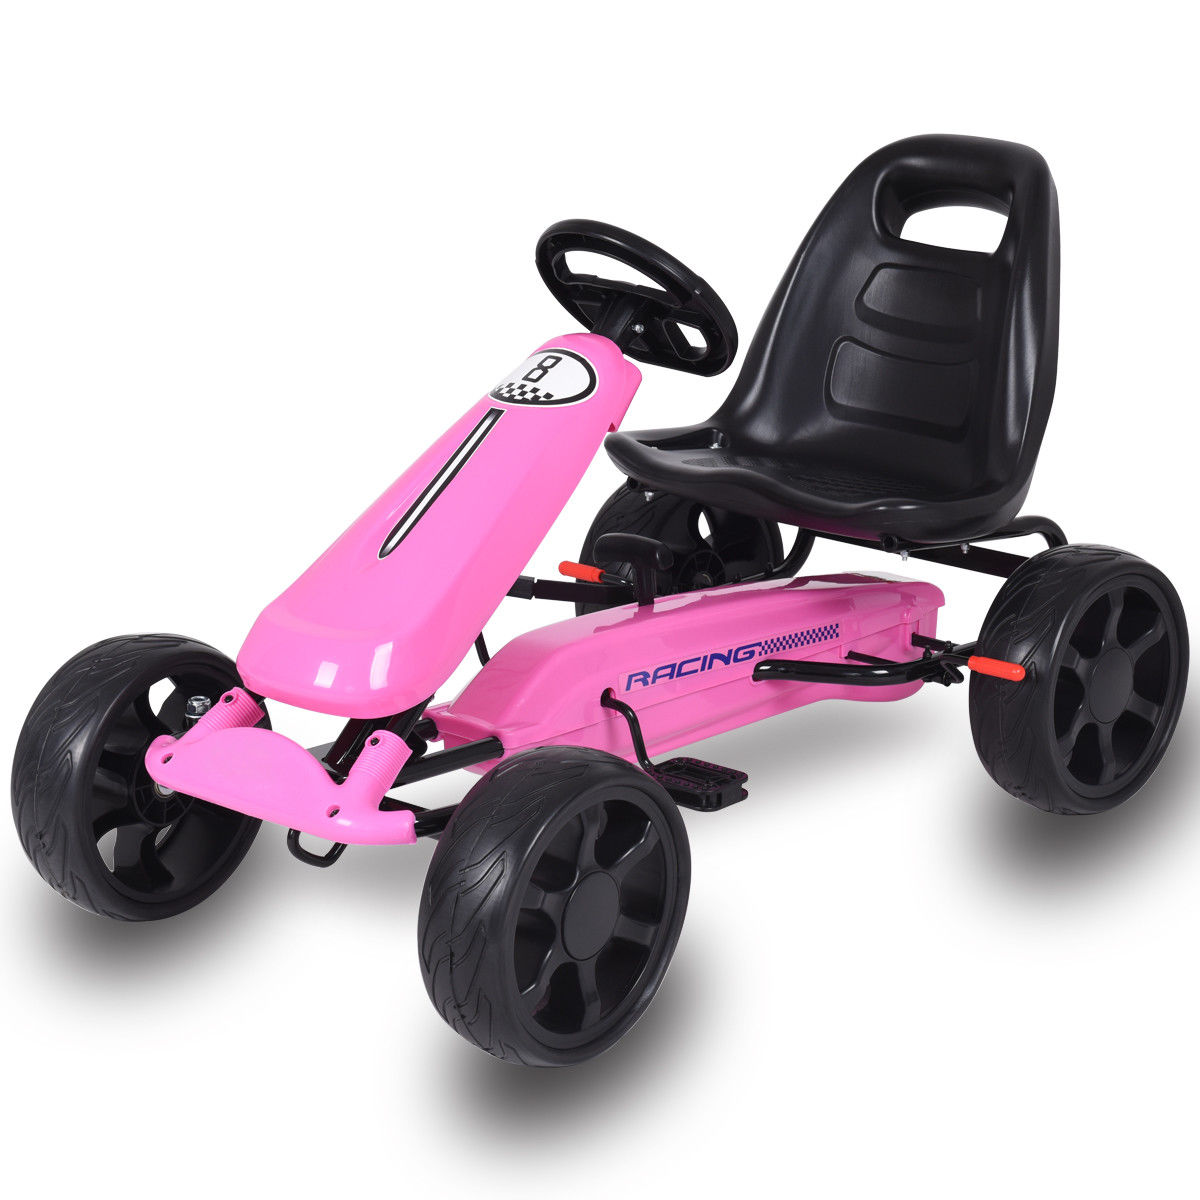 Go Kart Kids Ride On Car Pedal Powered 4 Wheel Racer Stealth Outdoor Toy Pink - image 1 of 10